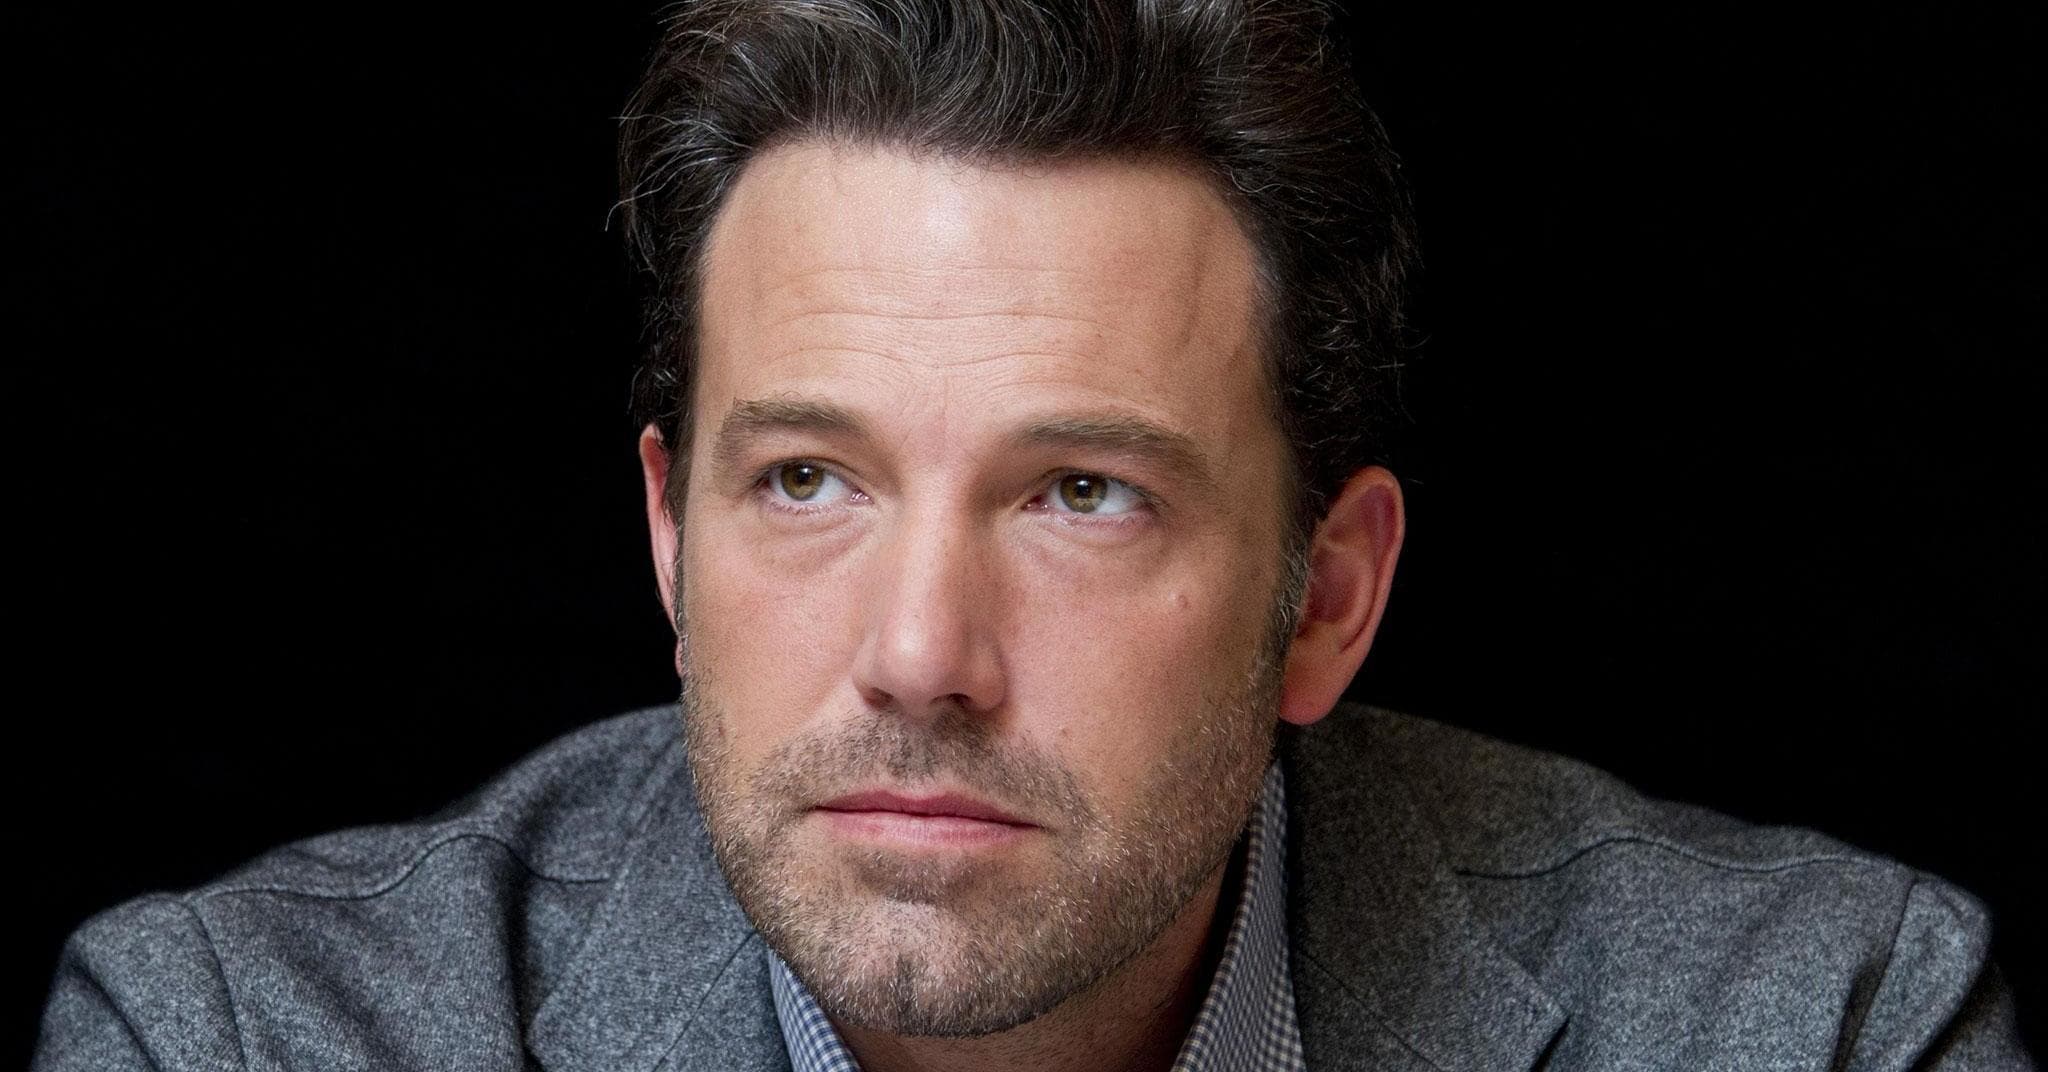 List Of Ben Affleck's Best Movies, Ranked By Fans